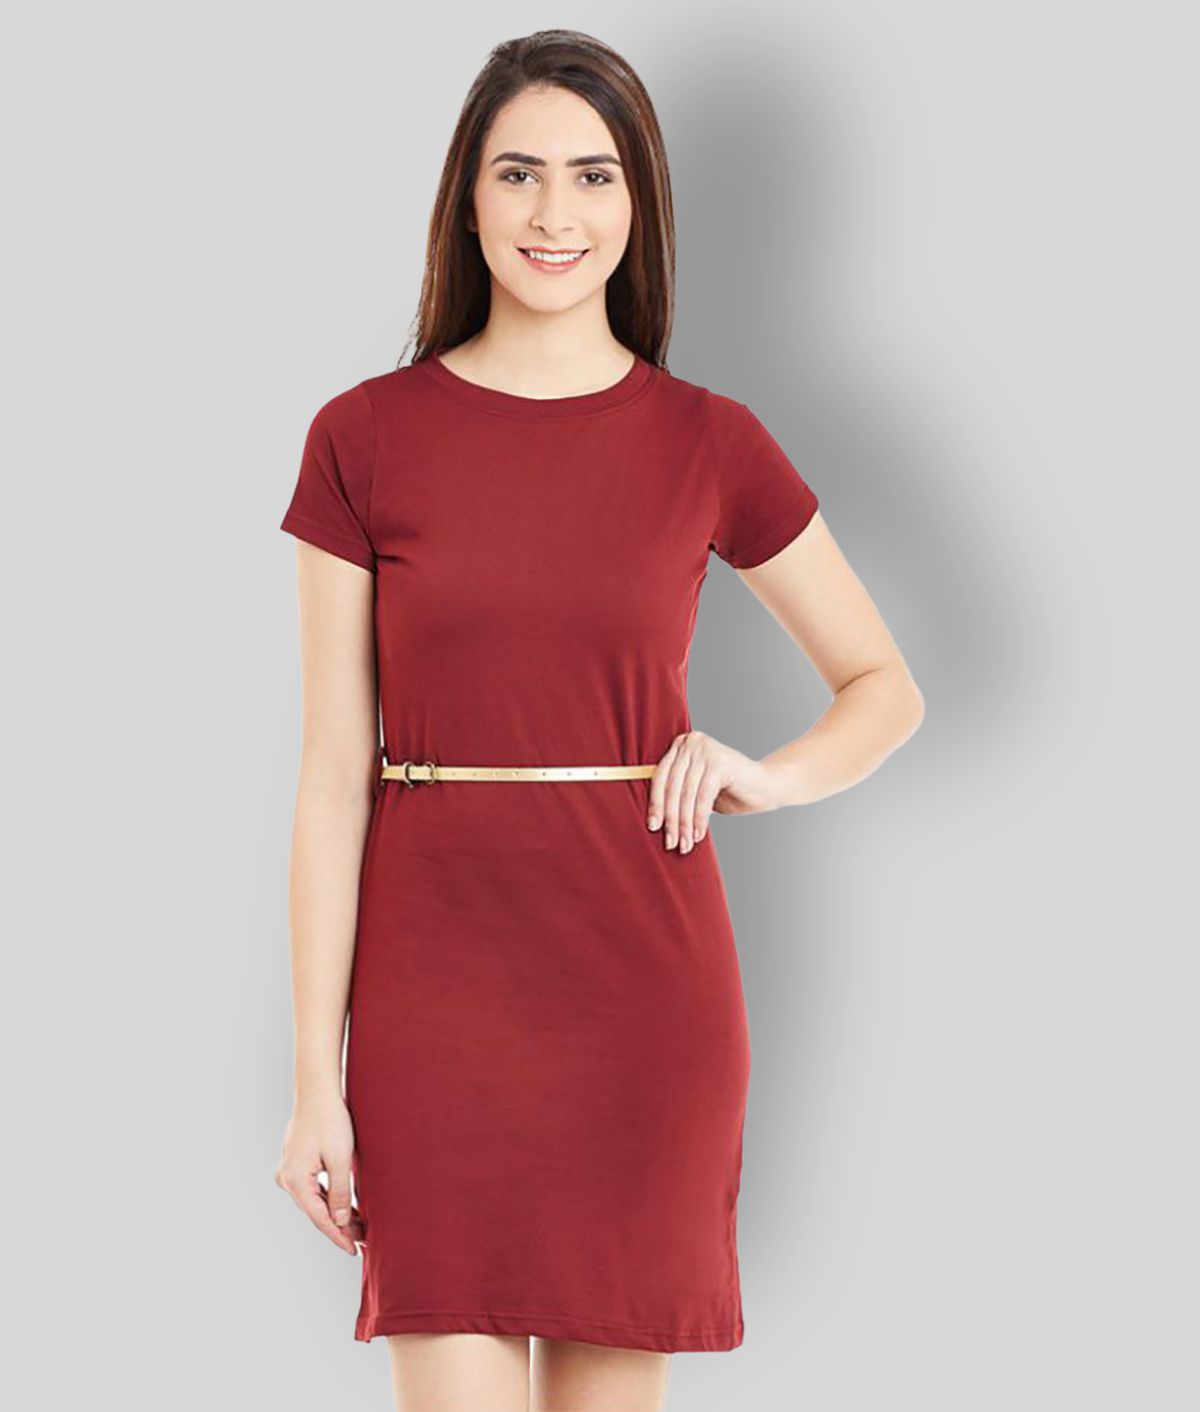     			Miss Chase - Maroon Cotton Women's Shift Dress ( Pack of 1 )